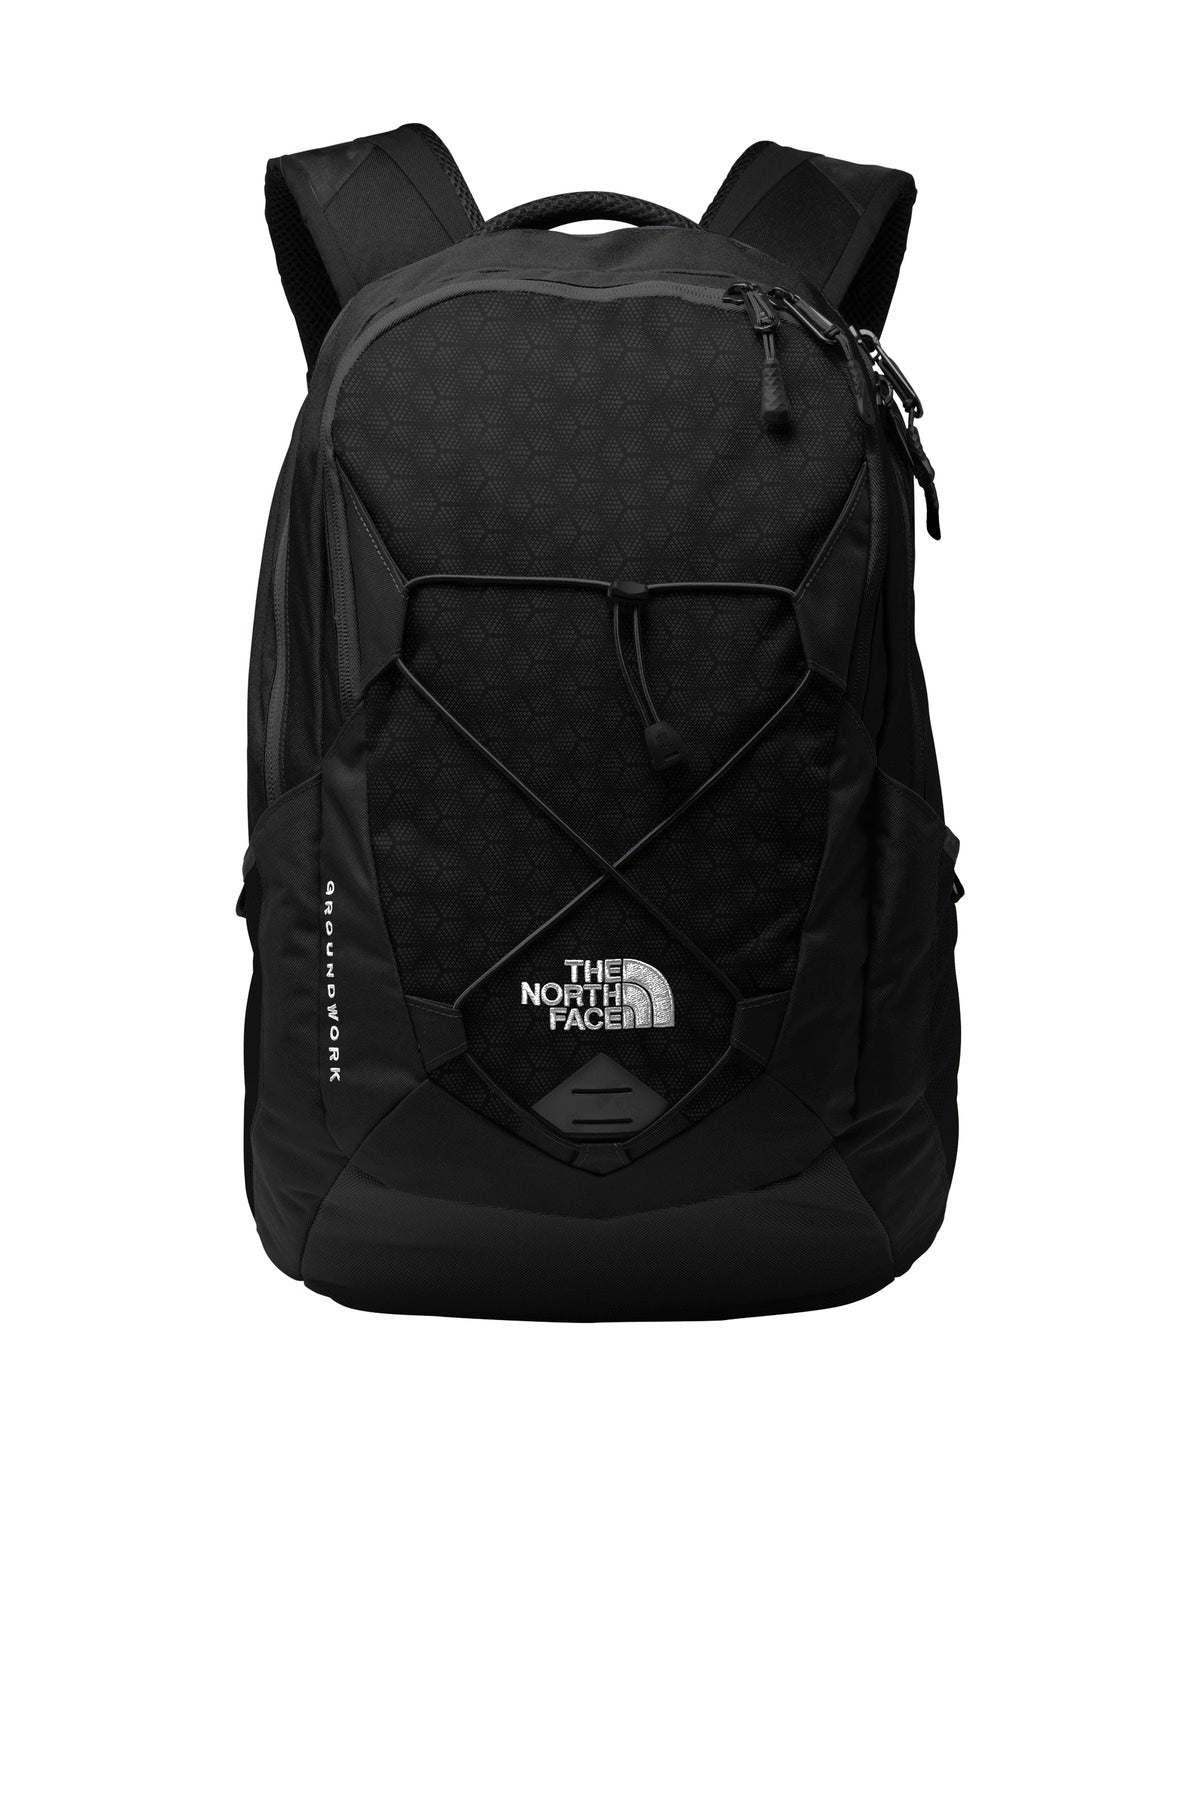 Photo of The North Face Bags NF0A3KX6  color  TNF Black